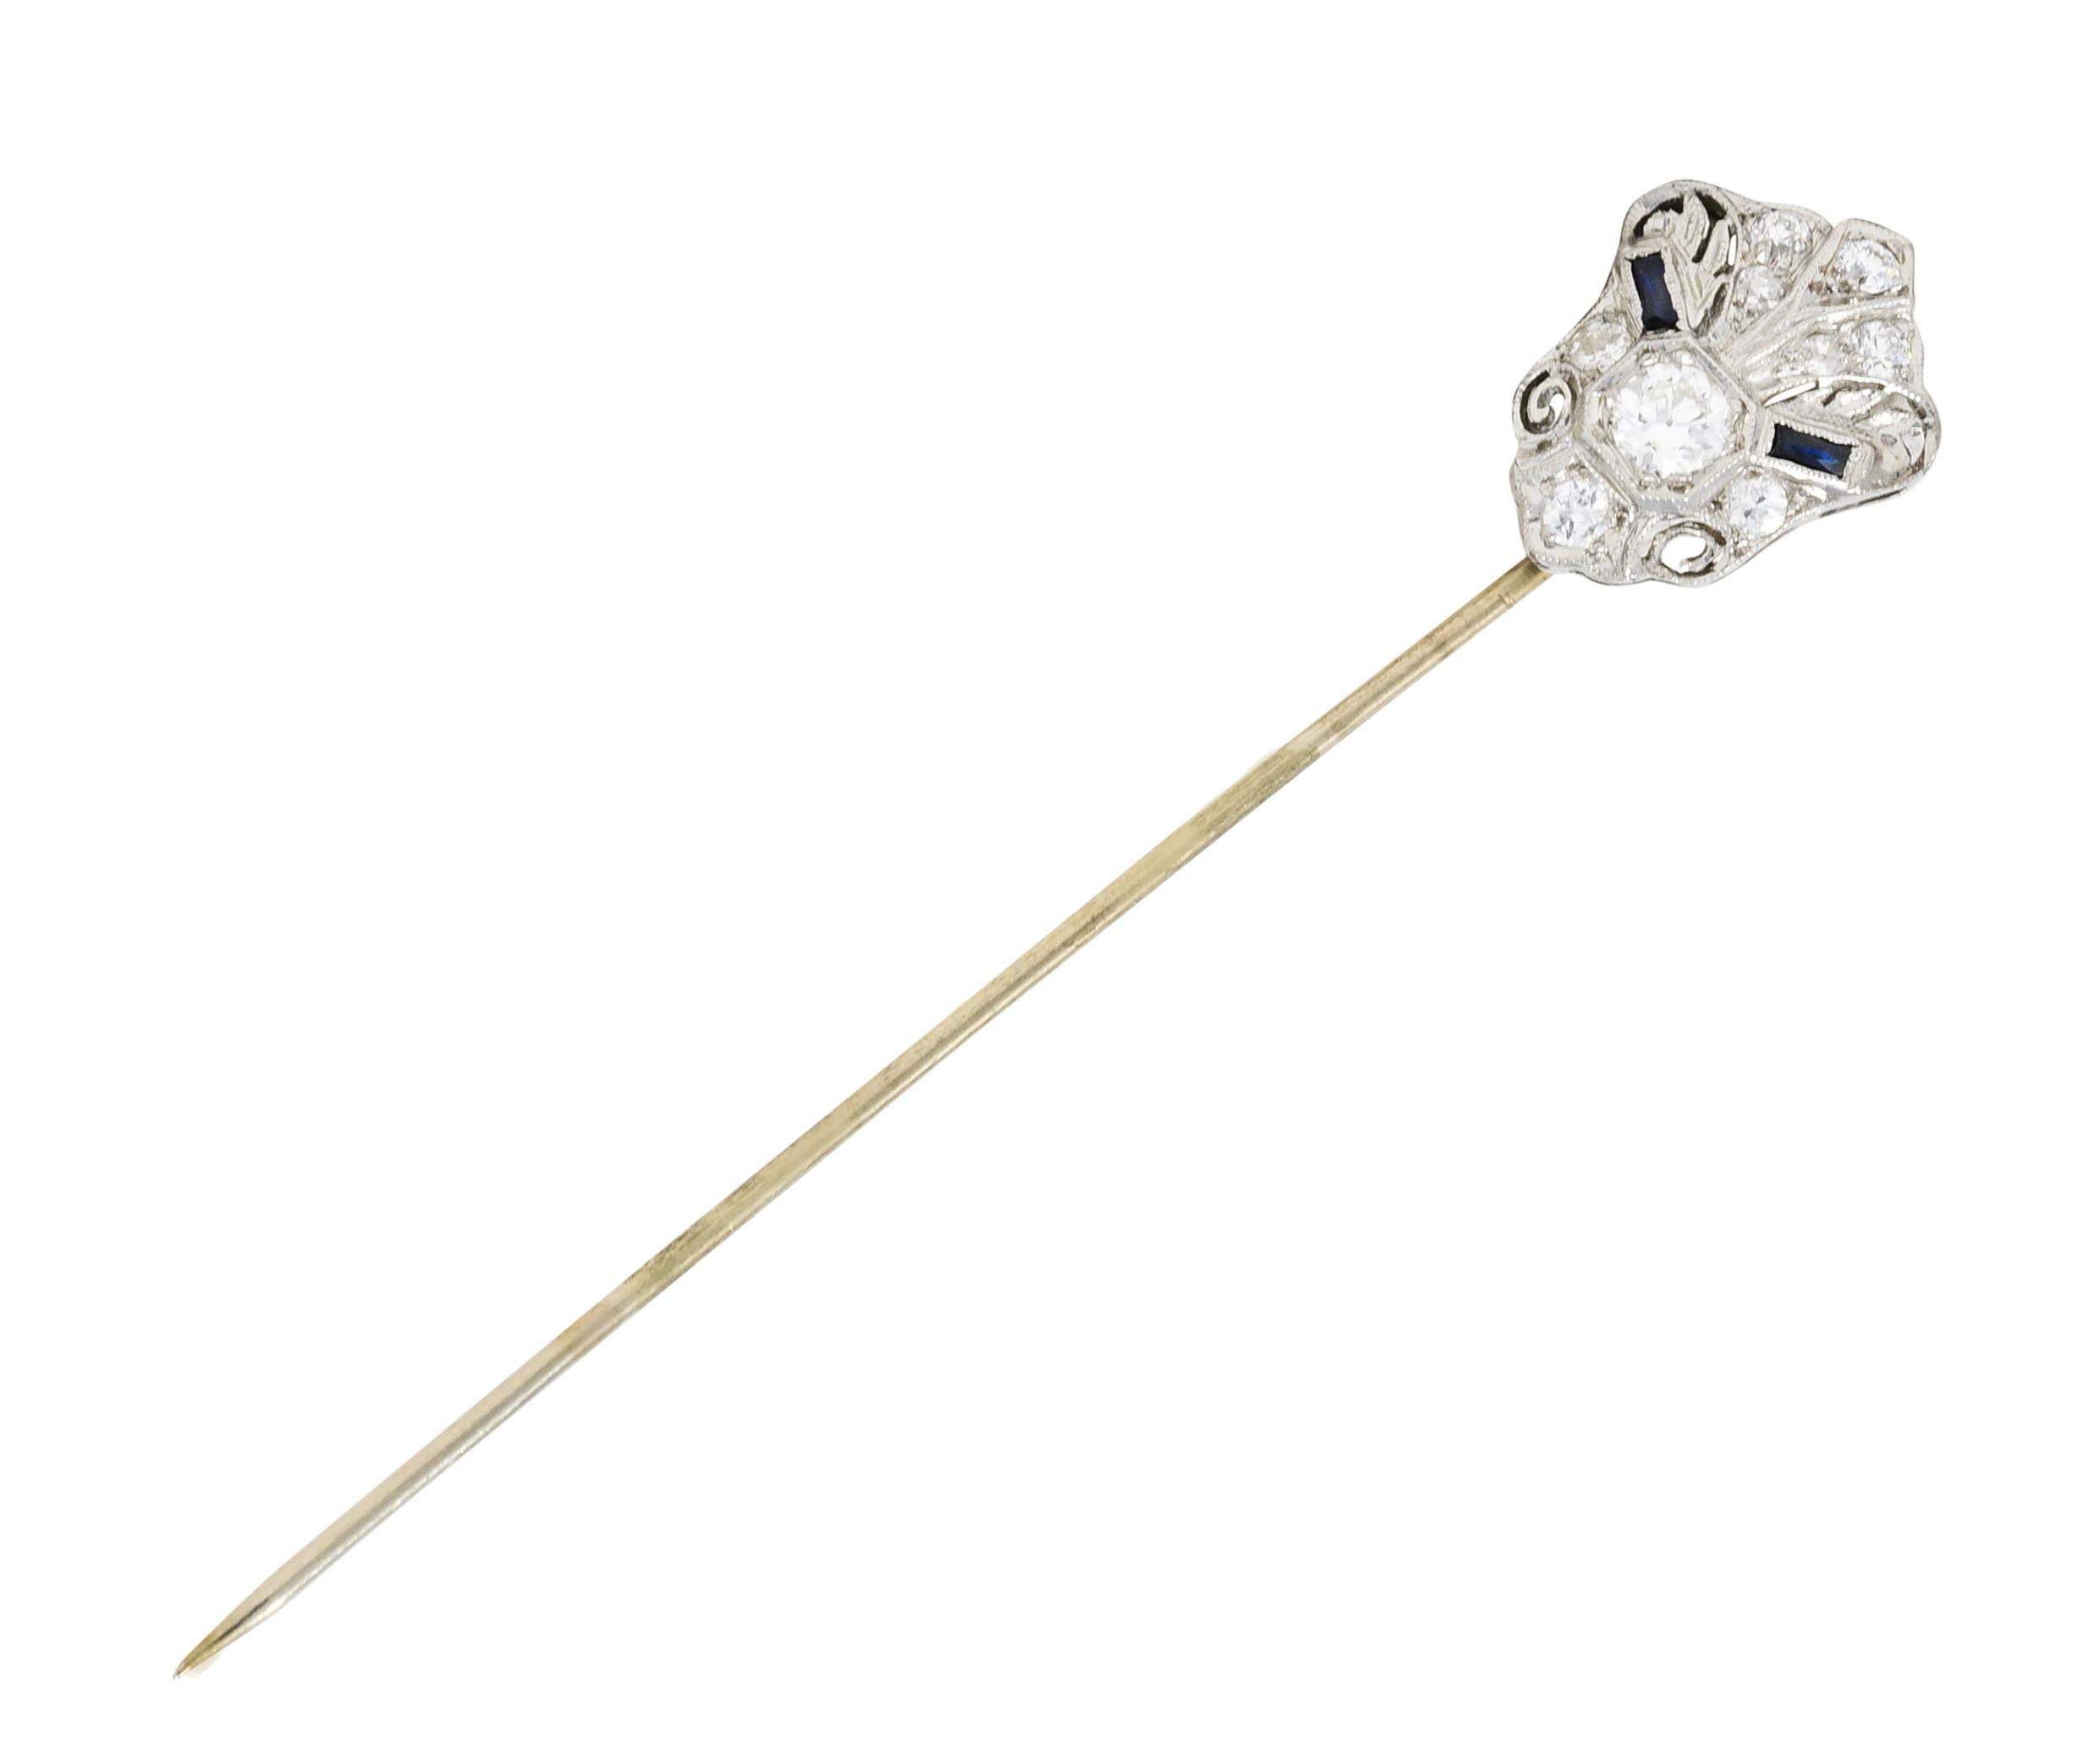 Cartouche style stickpin is accented by scrolled volutes and synthetic sapphire

While centering an old European cut diamond weighing approximately 0.27 carat - I/J color and SI1 clarity

With old European cut and single cut diamonds weighing in